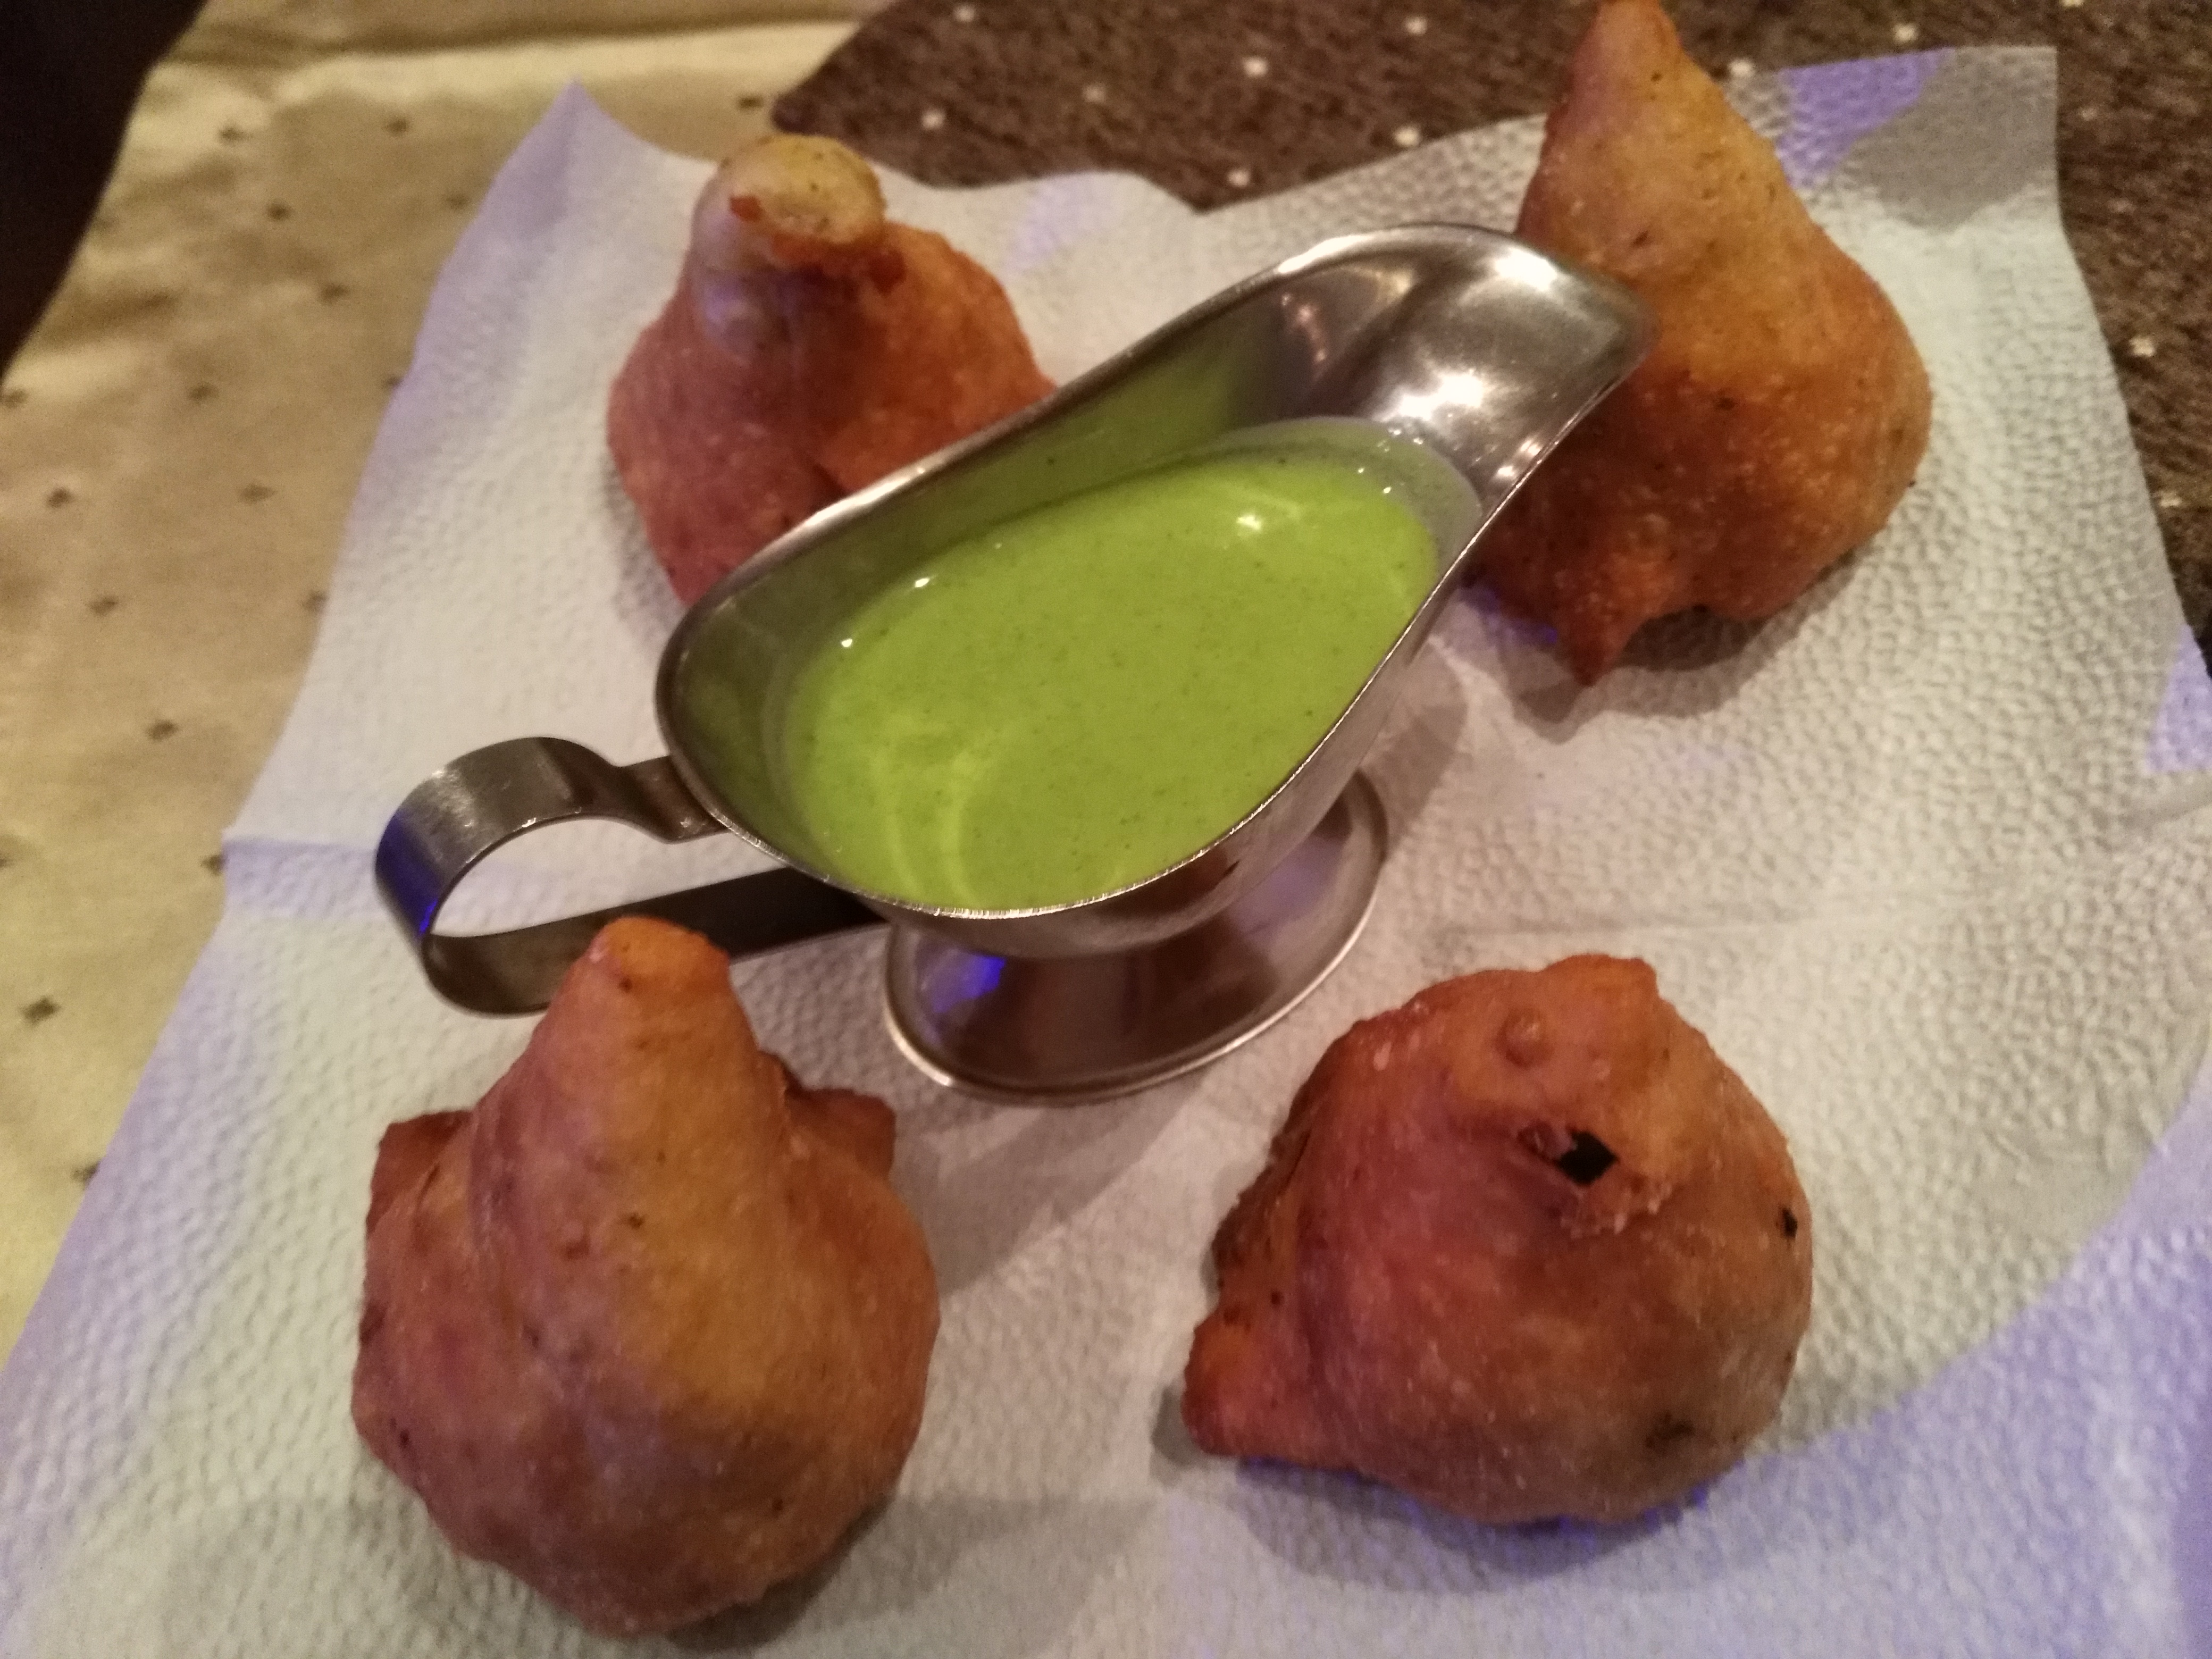 Samosas at the Indian restaurant with a creamy, green dip that tasted curiously like bananas.